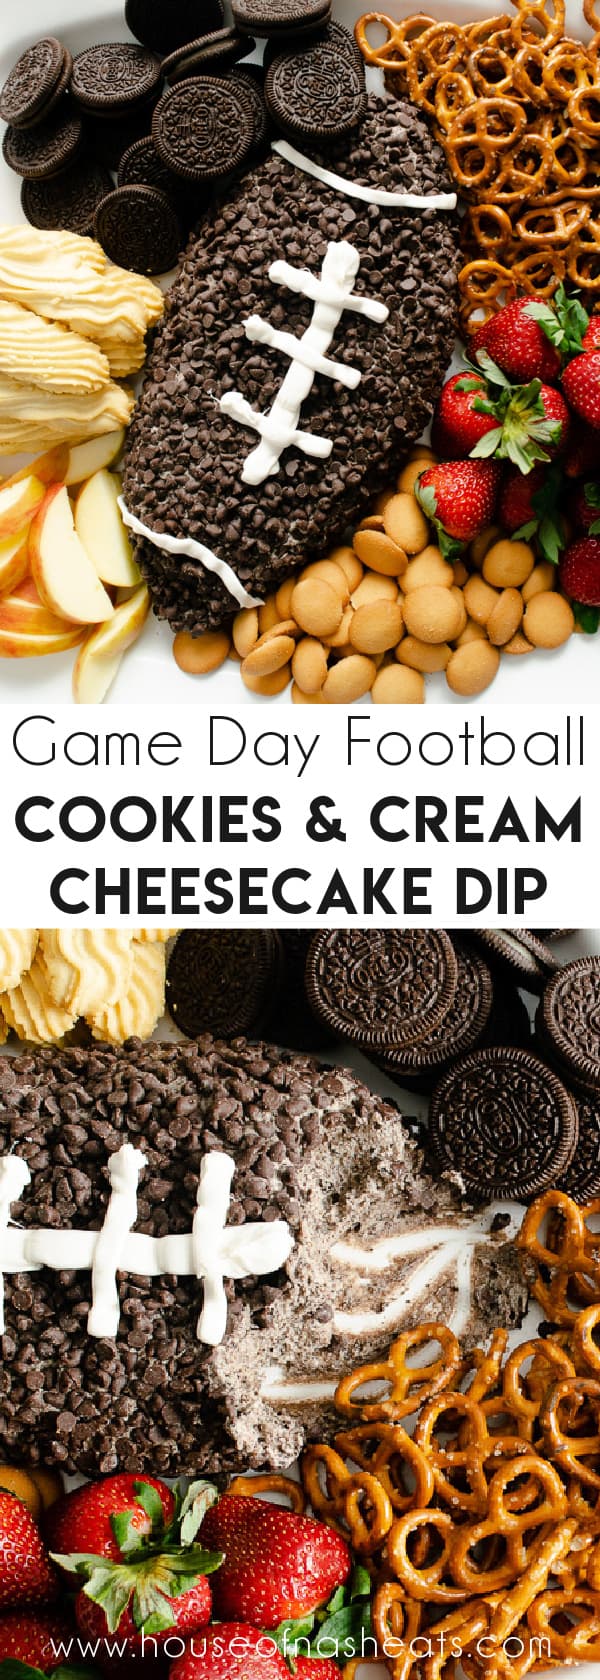 A collage of images of a football cookies & cream cheesecake dip with text overlay.